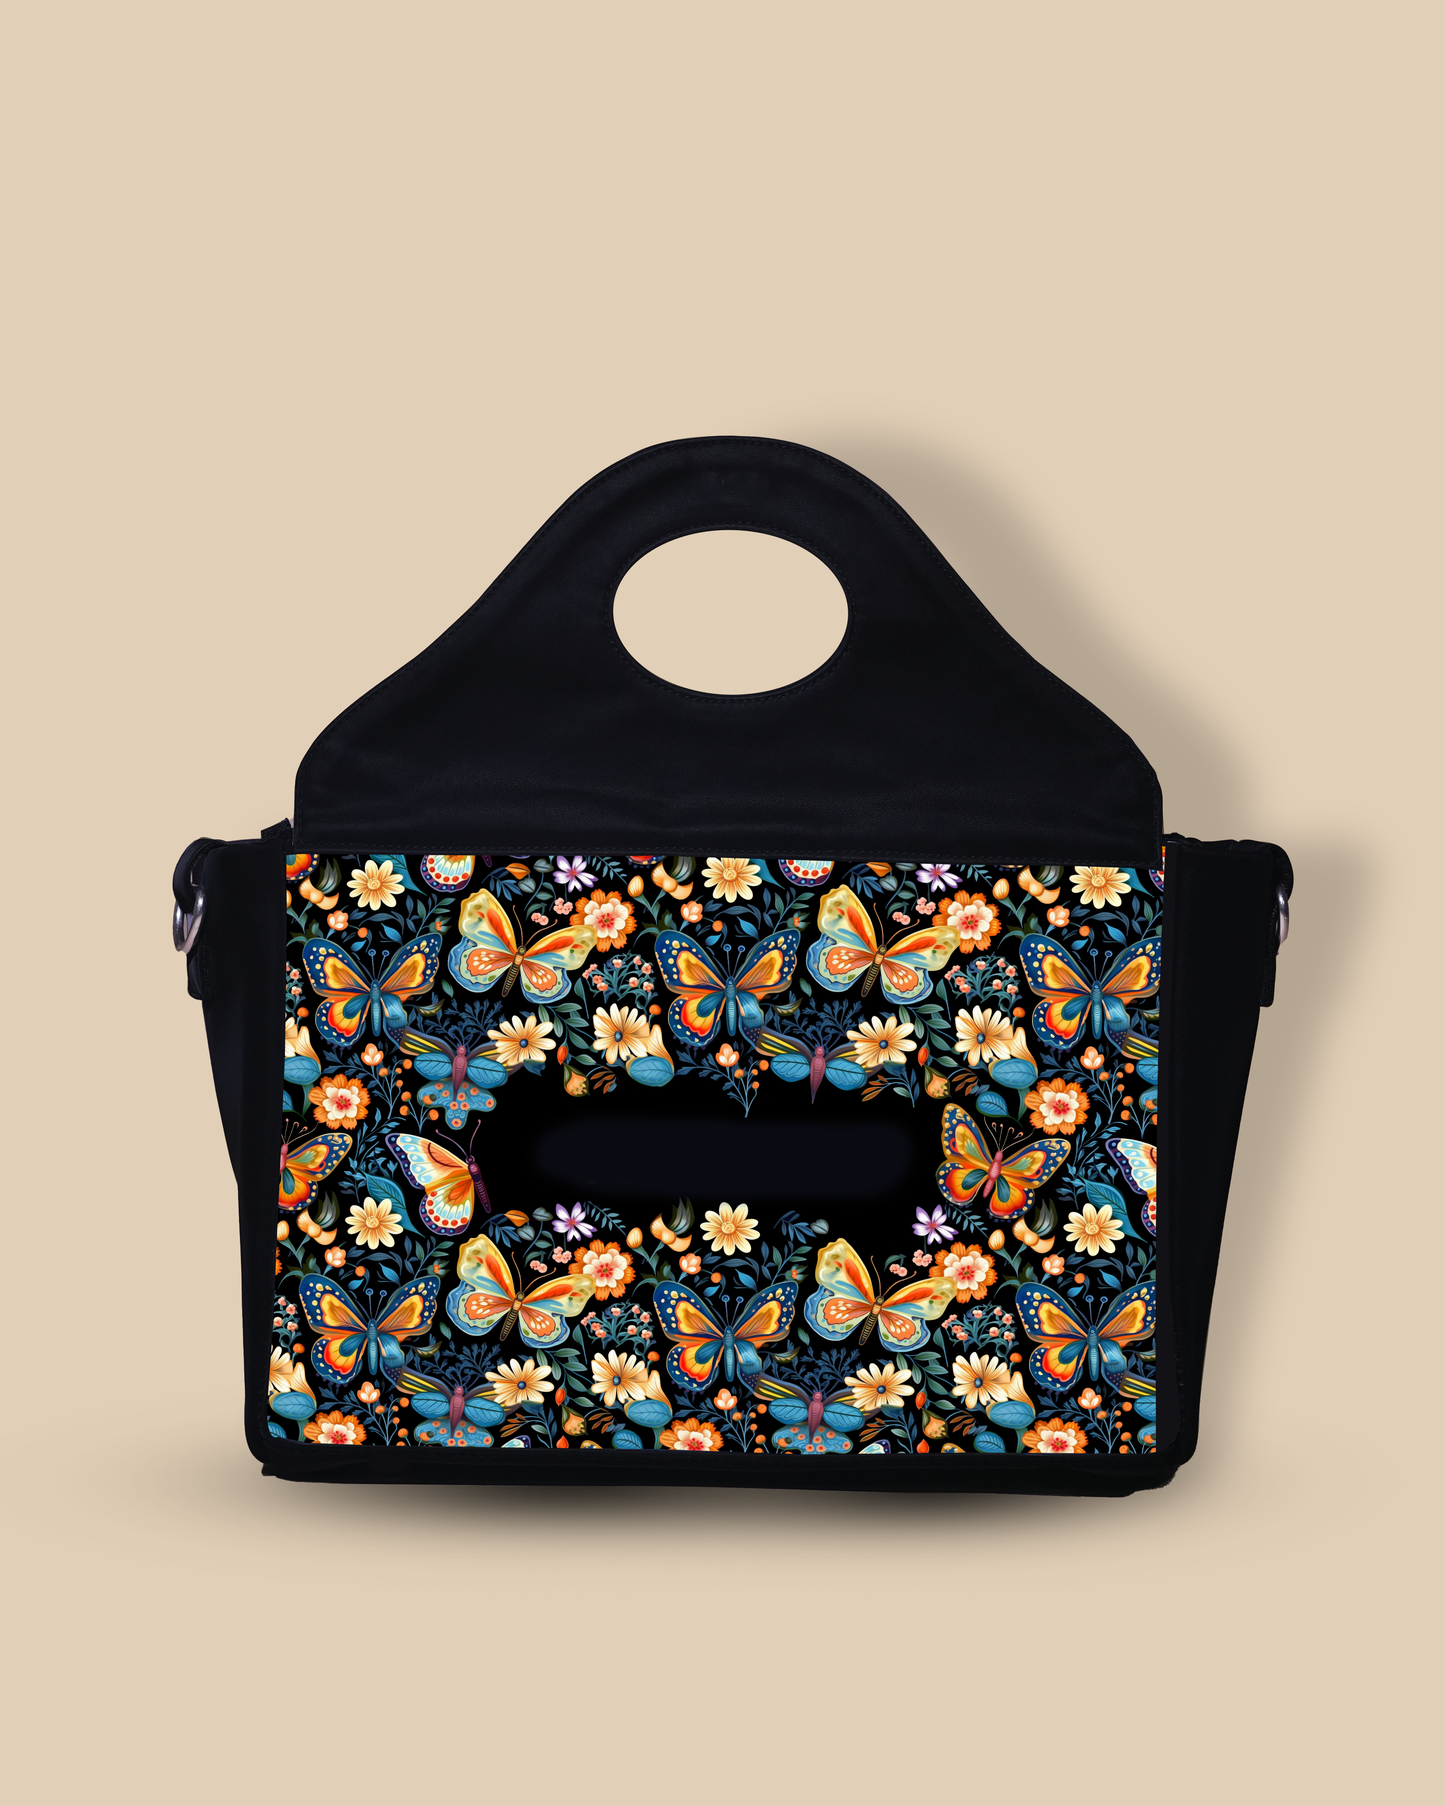 Customized Sling Purse Designed With Blossom Colorful Butterflies